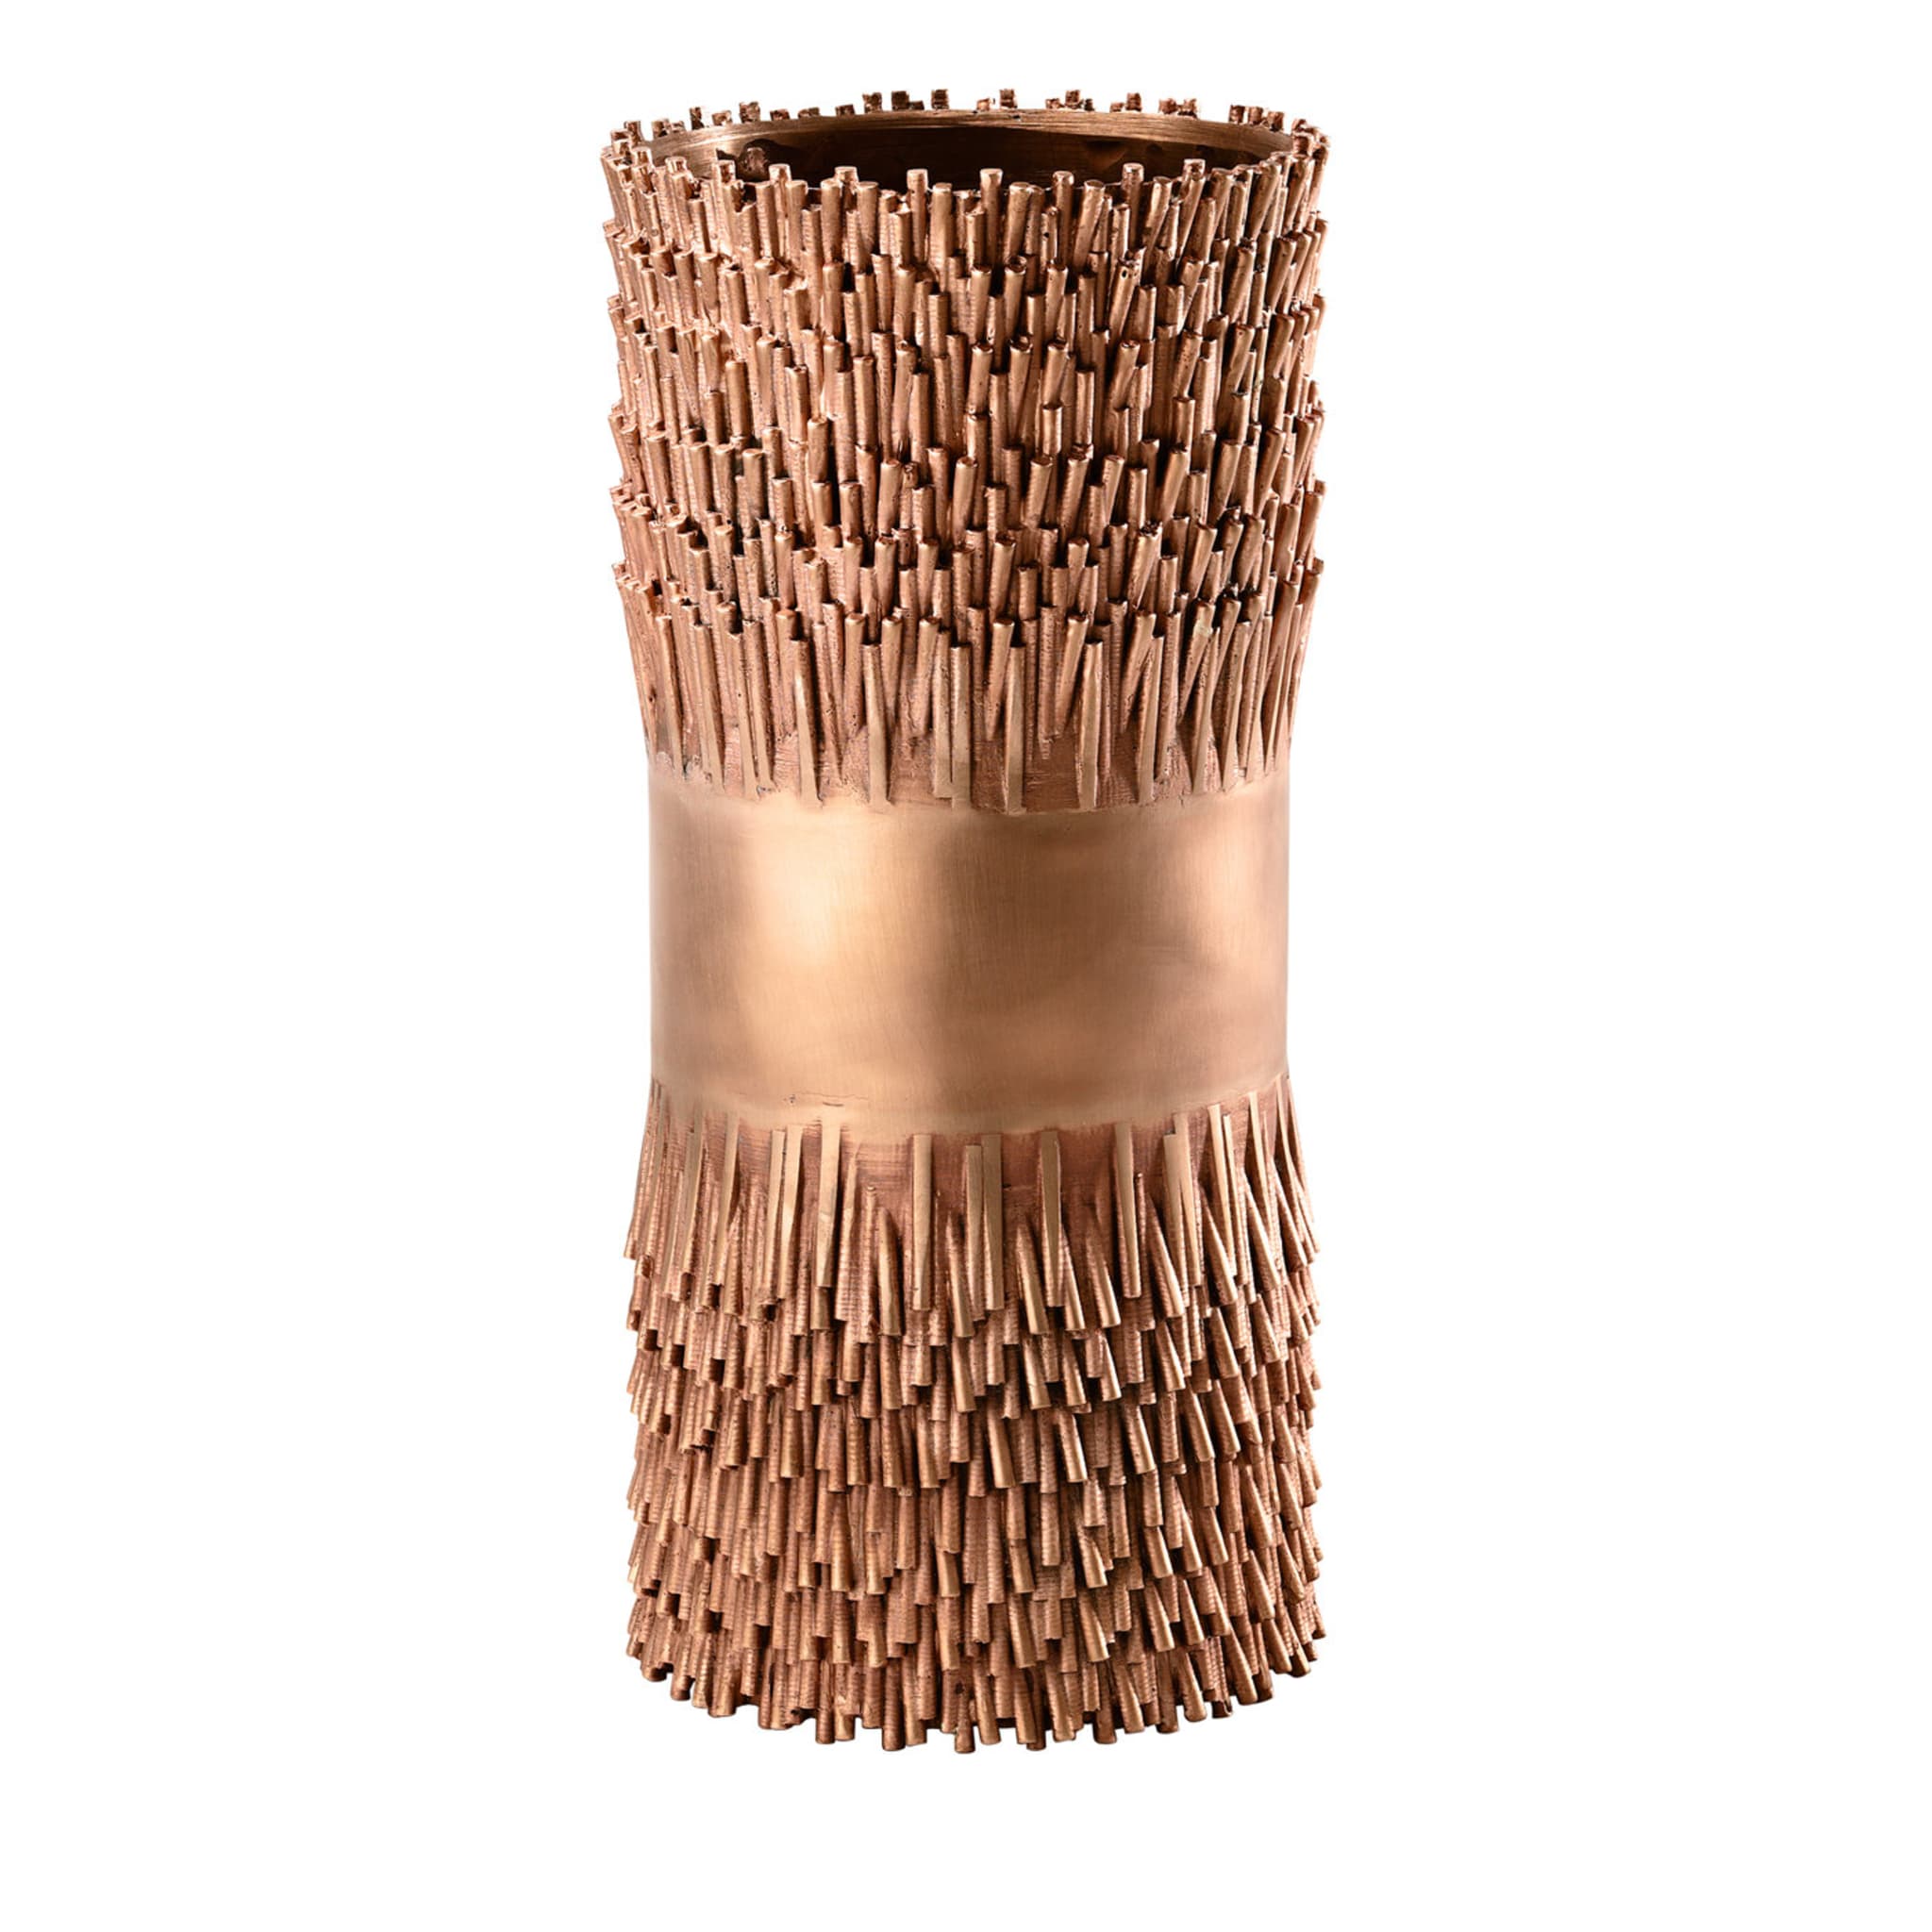 Jack Fruit Bronze Vase By Campana Brothers - Main view